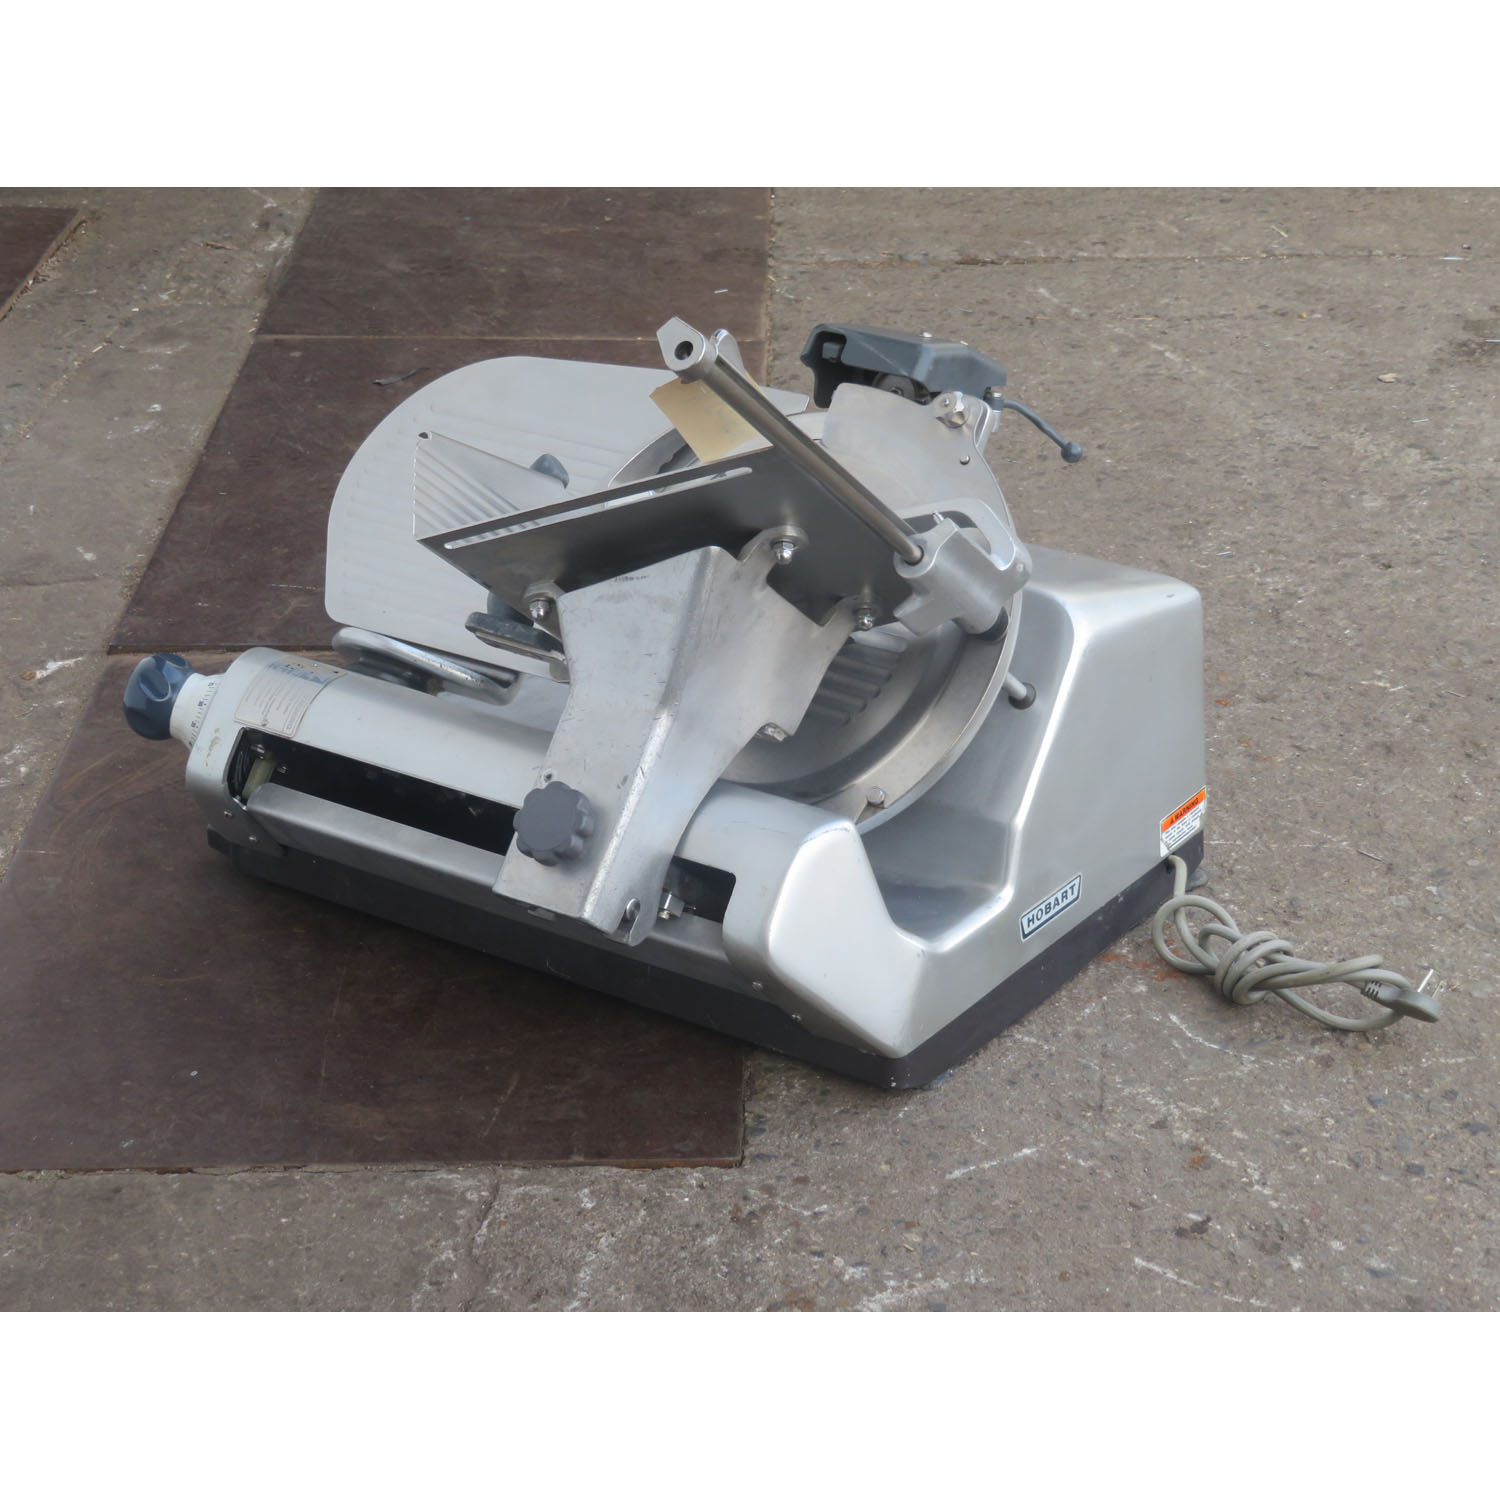 Hobart 3813 Meat Slicer, Used Great Condition image 2